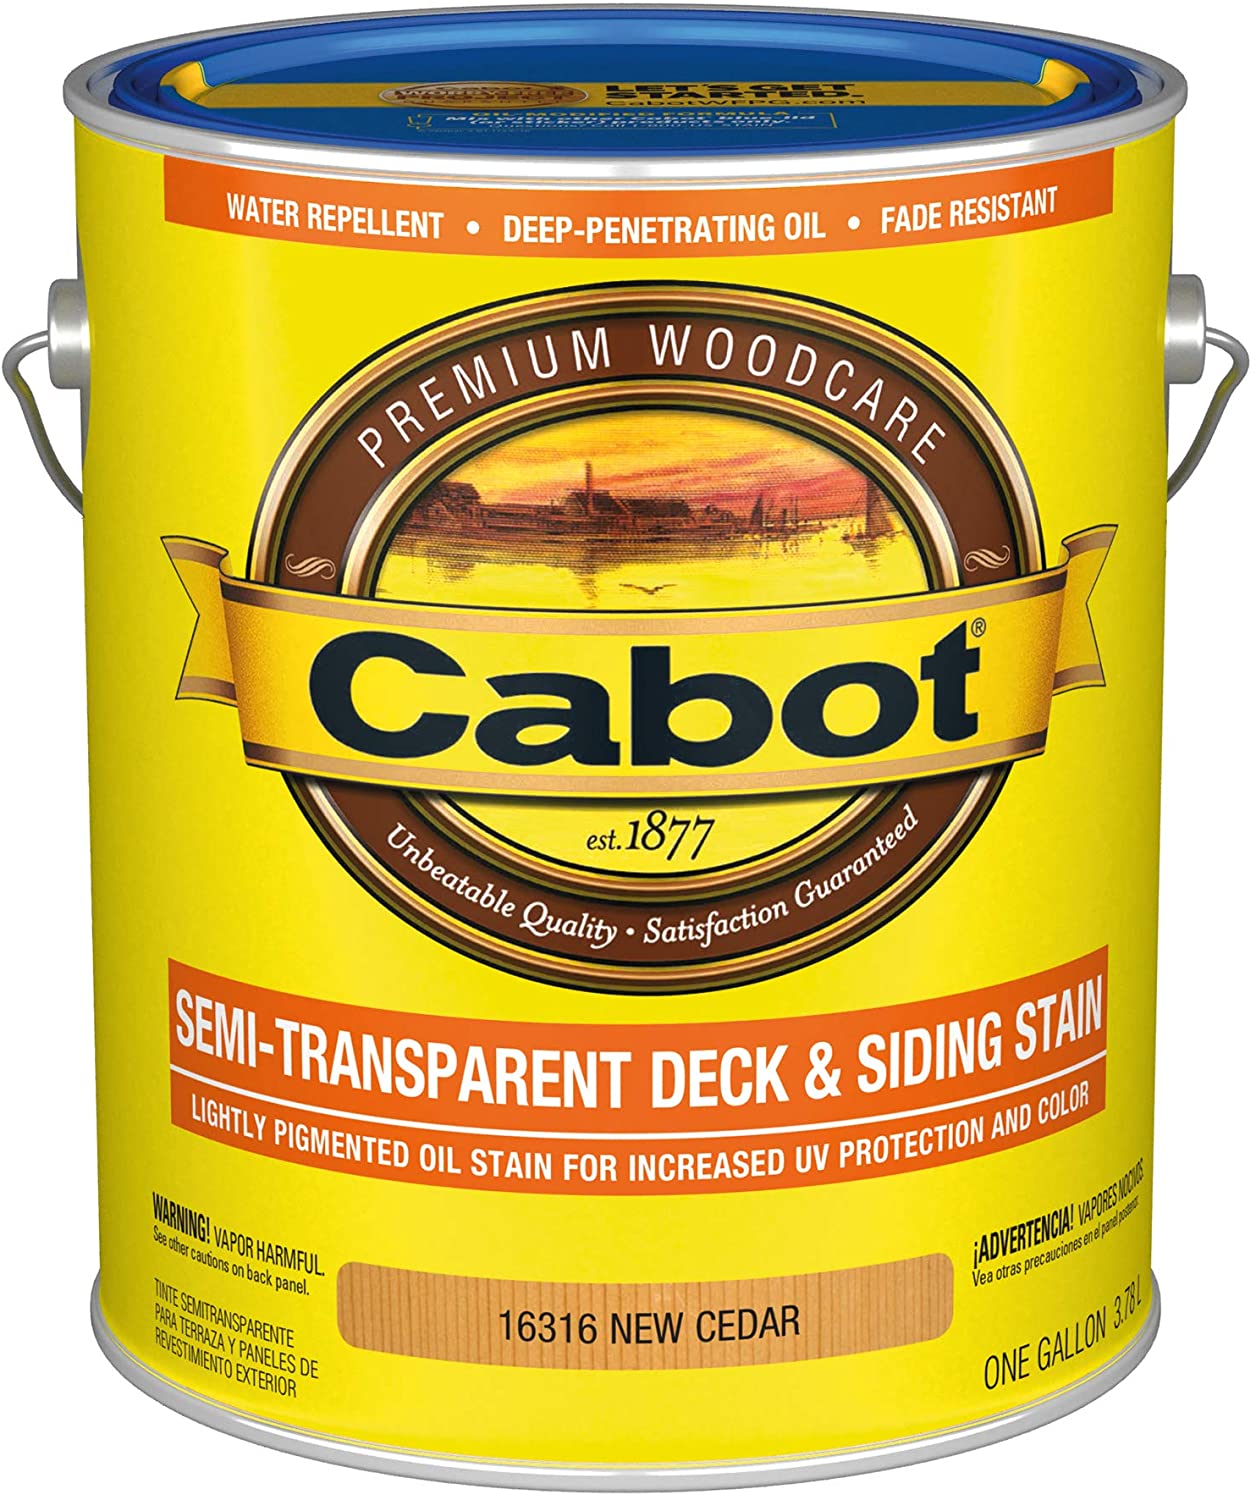 Cabot Semi-Transparent Deck Stain review